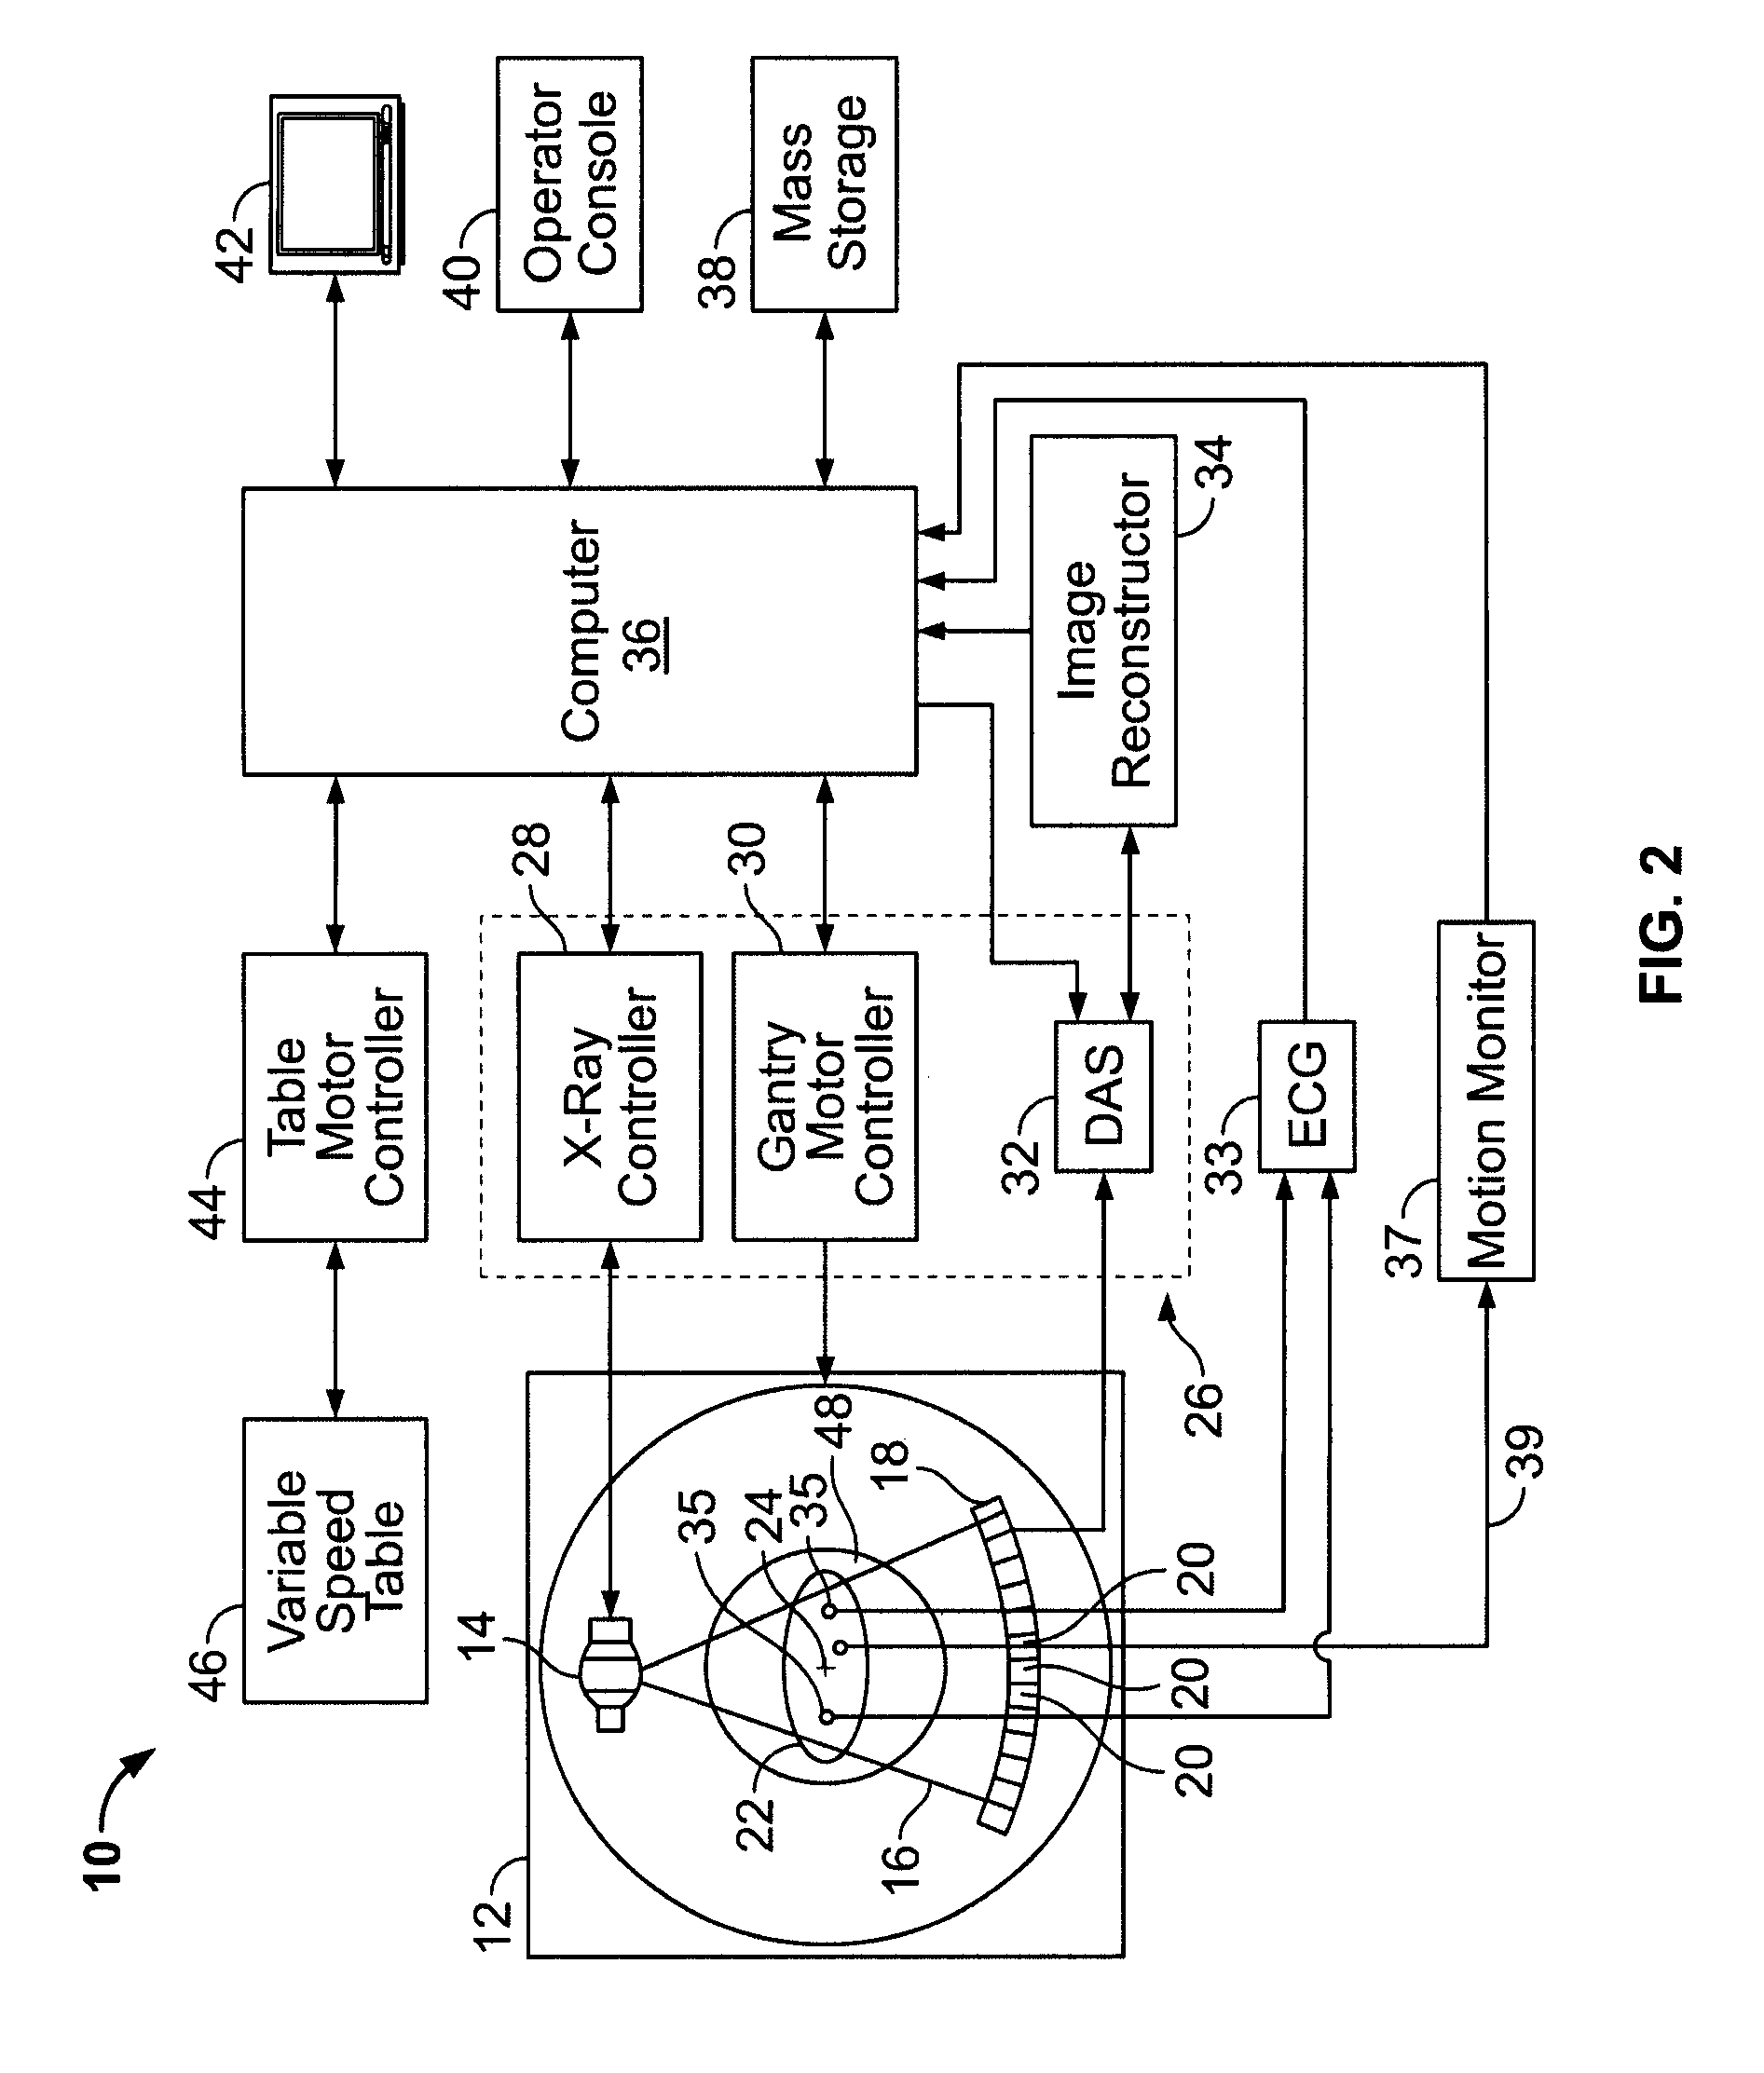 Method and apparatus for reconstructing images of moving structures based on temporal data